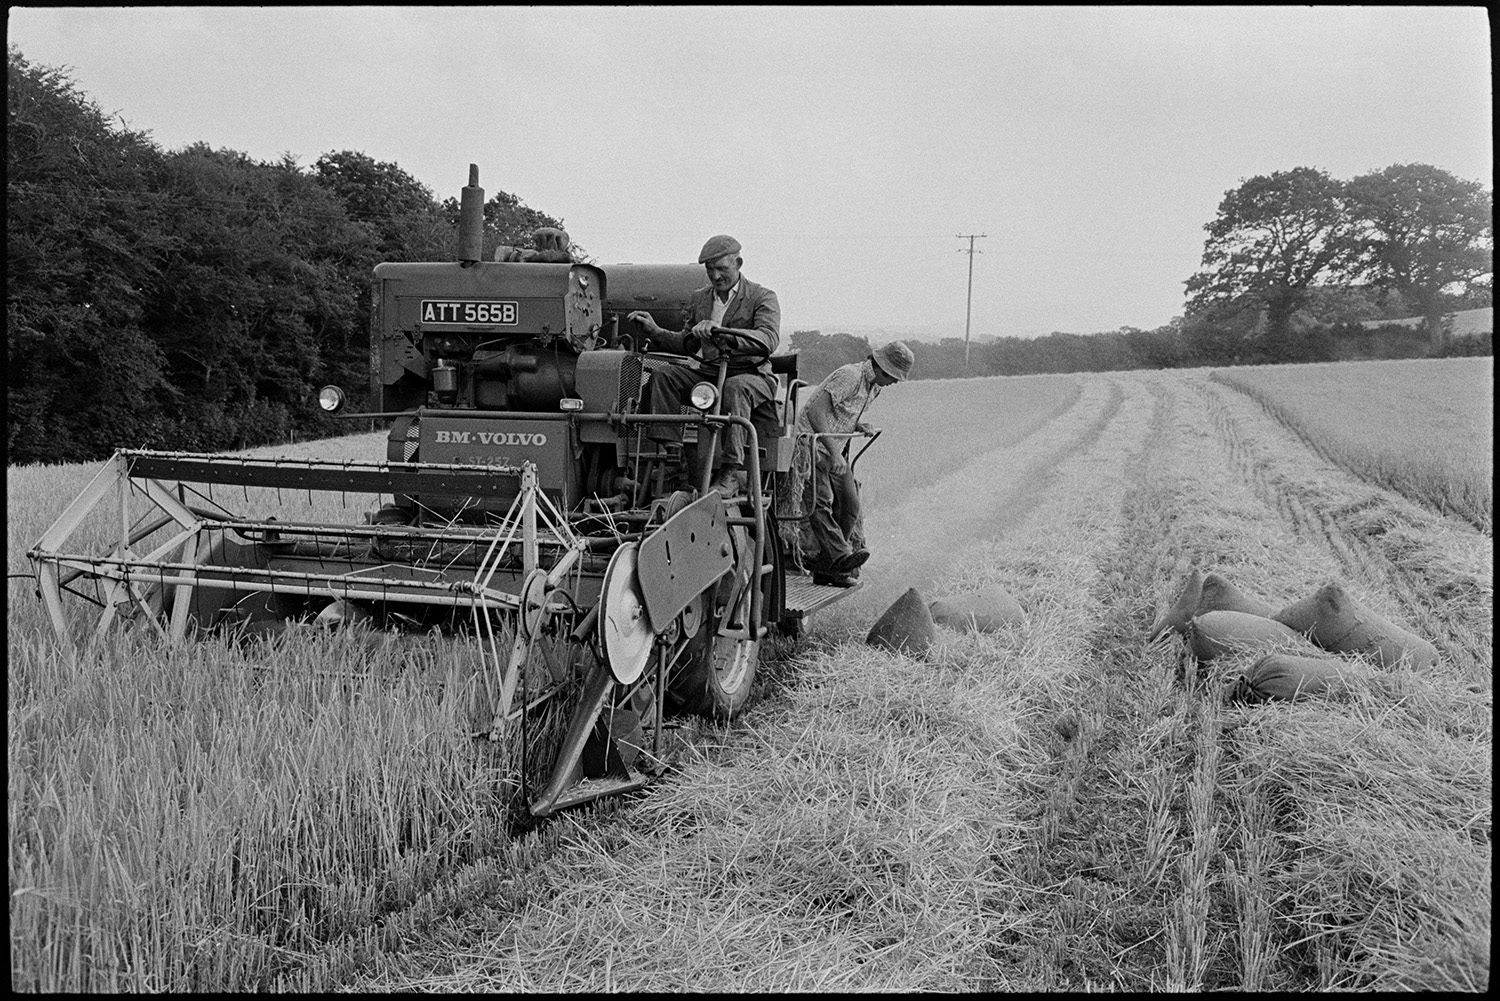 Two men using a combine harvester to harvest a crop in a field at Parsonage,Iddesleigh. One of the men is driving the combine harvester while the other is managing sacks of grain.